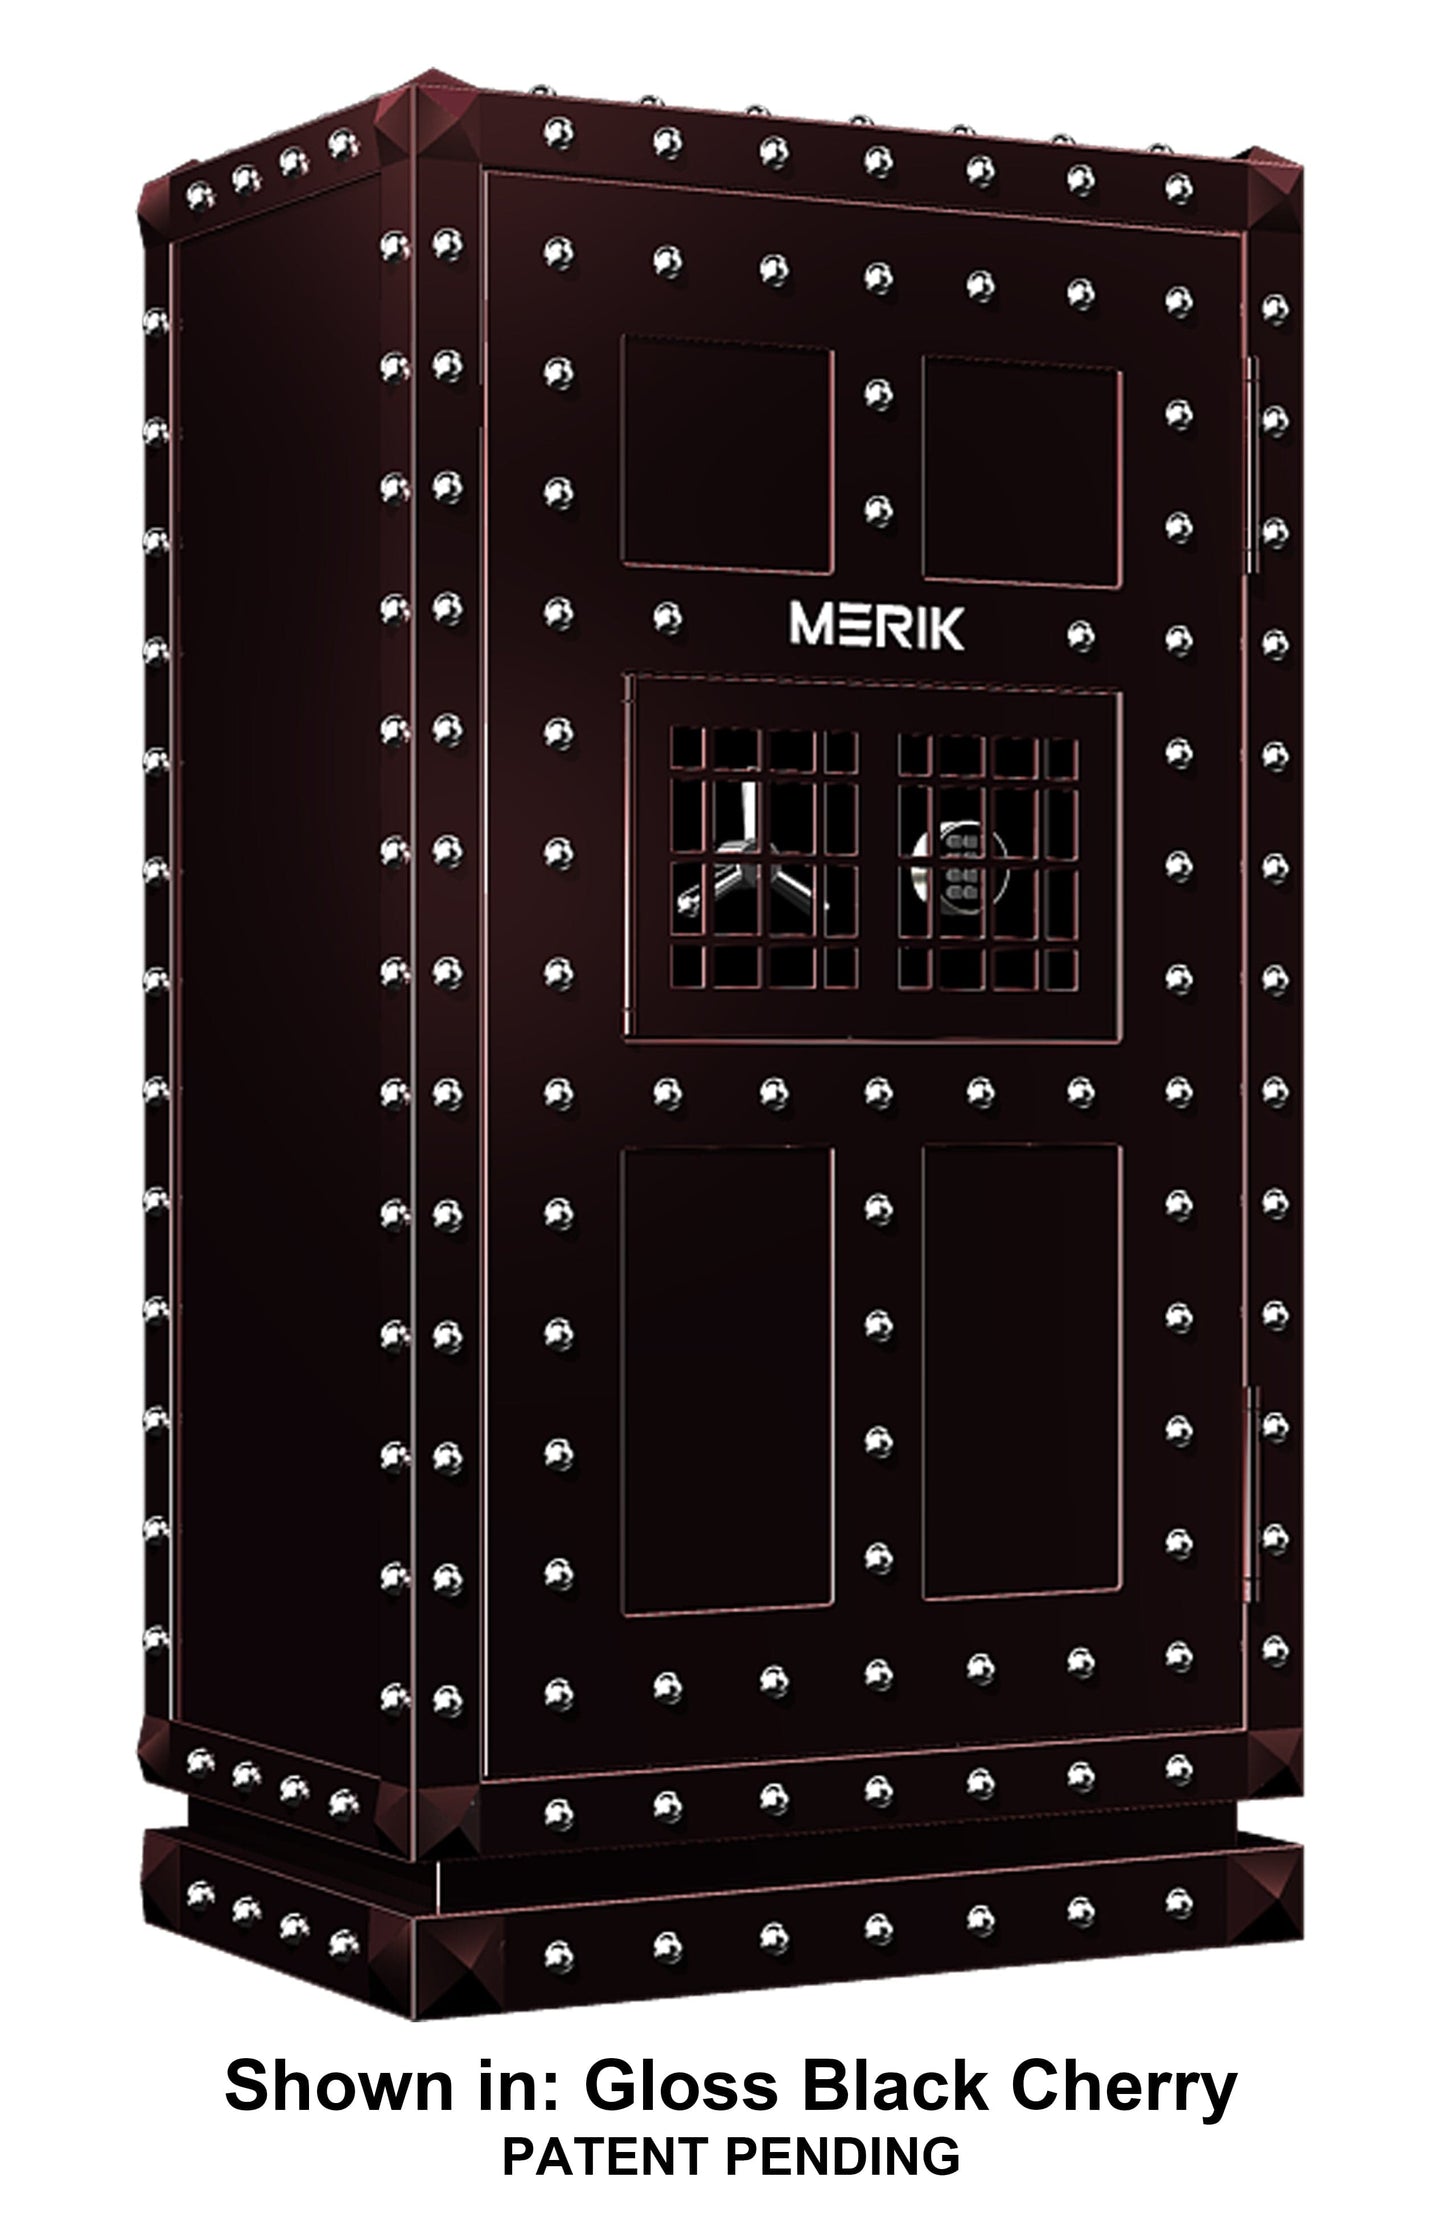 MERIK Dungeon Burglary and Fire Rated Gun Vault - 72’’h x 42”w x 28’’d - 42 Gun Capacity - Patented - Available early 2024